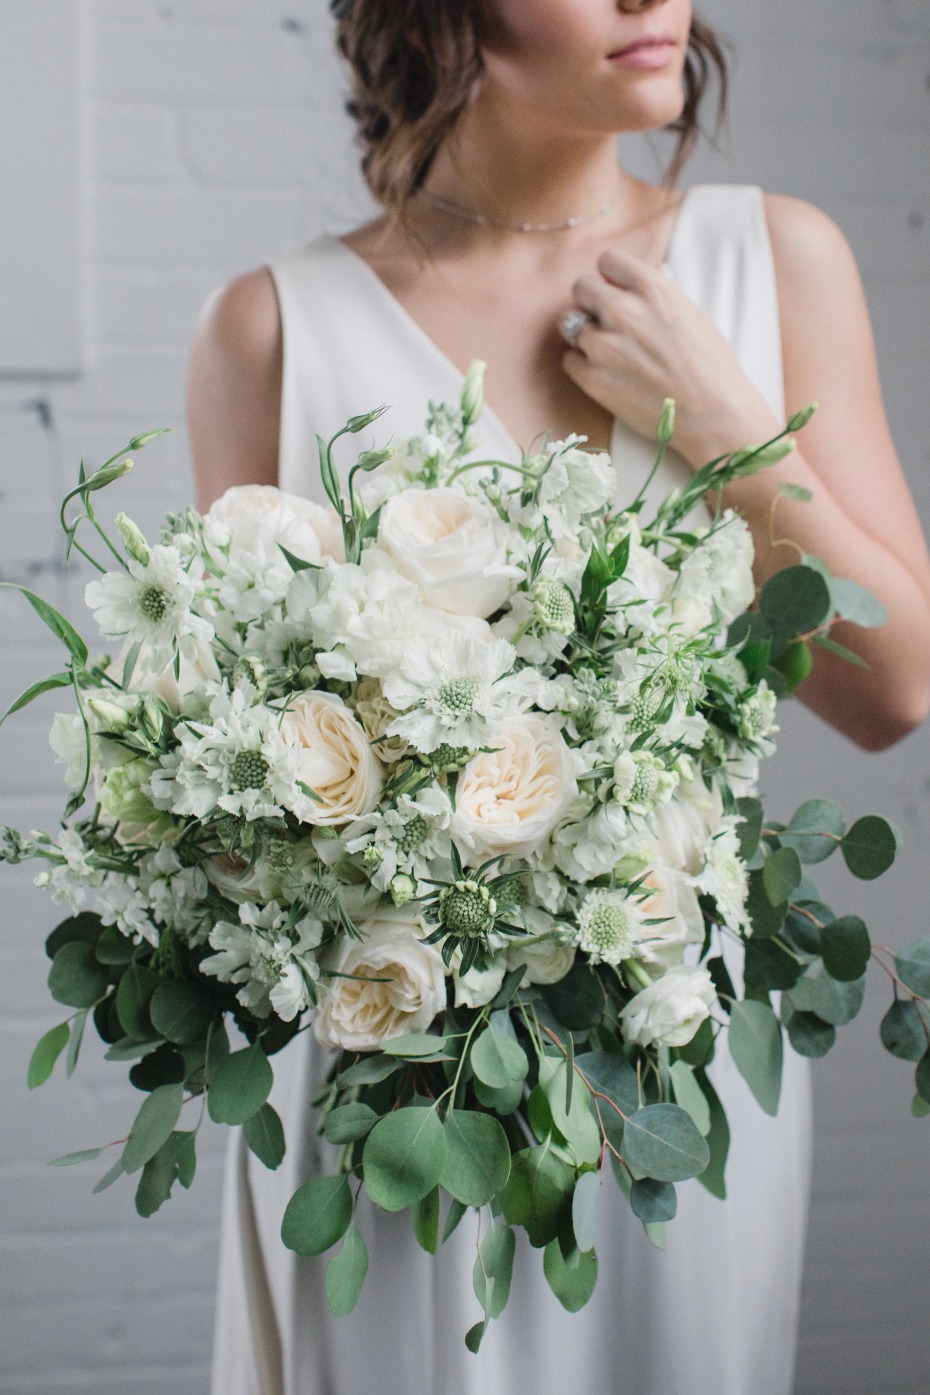 Gorgeous bouquet from Fifty Flowers